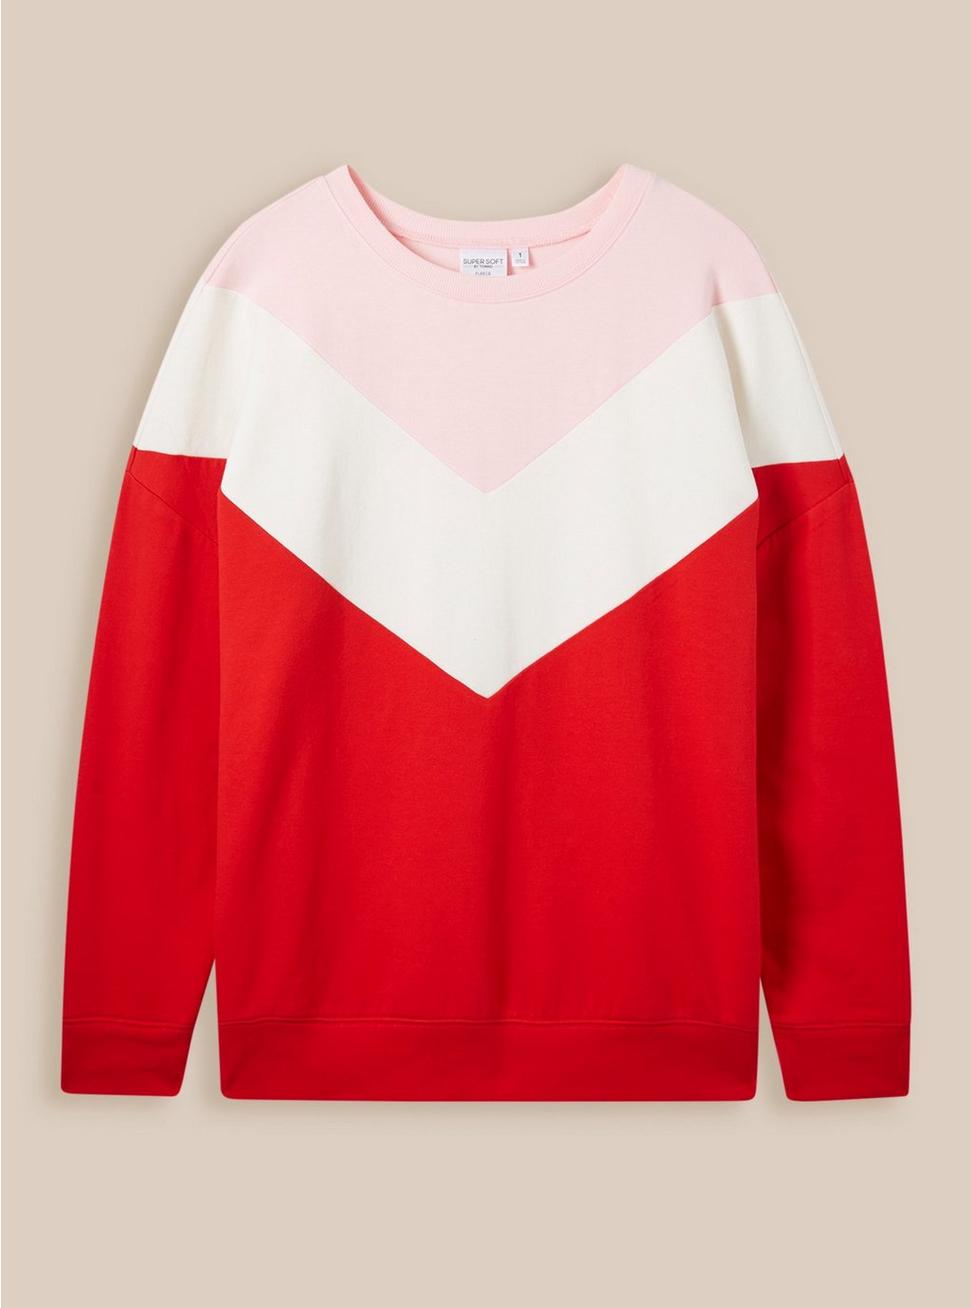 Relaxed Fit Super Soft Fleece Chevron Colorblock Lace Sweatshirt, RED, hi-res